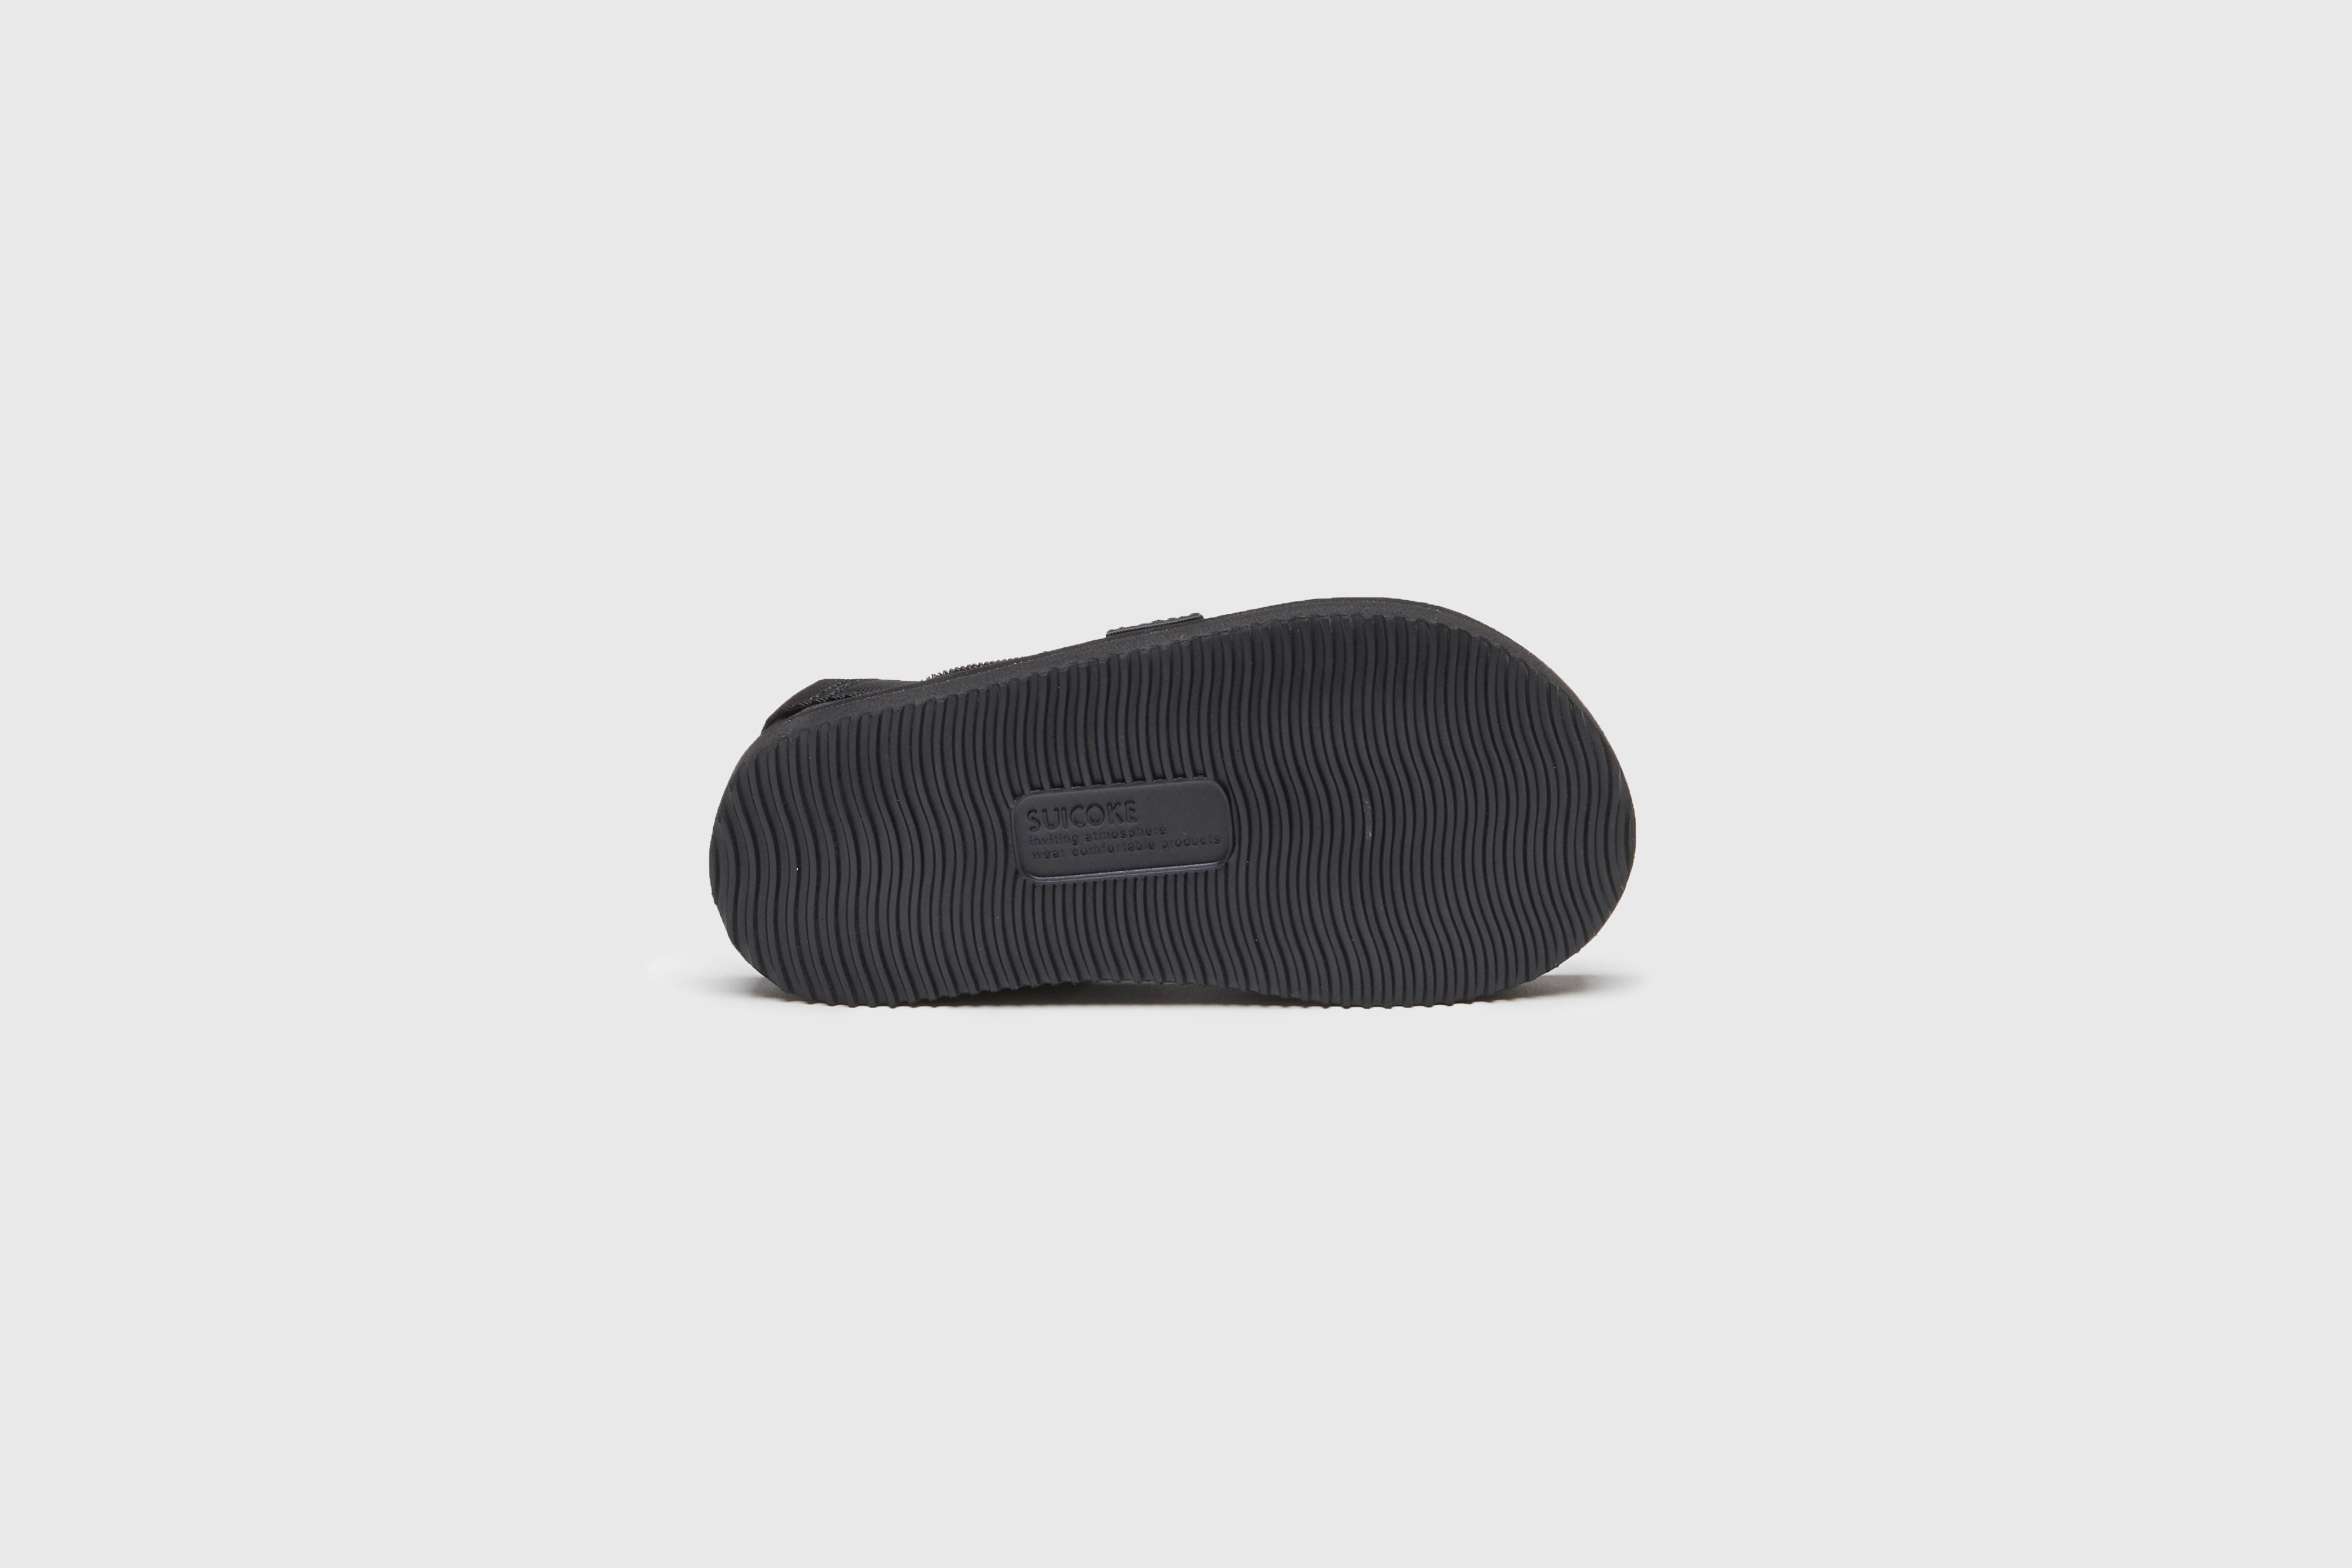 SUICOKE MOTO-2kids-PT05 slides with navy & gray nylon upper, navy & gray midsole and sole, strap and logo patch. From Spring/Summer 2023 collection on eightywingold Web Store, an official partner of SUICOKE. OG-056-2KIDS-PT05 NAVY X GRAY